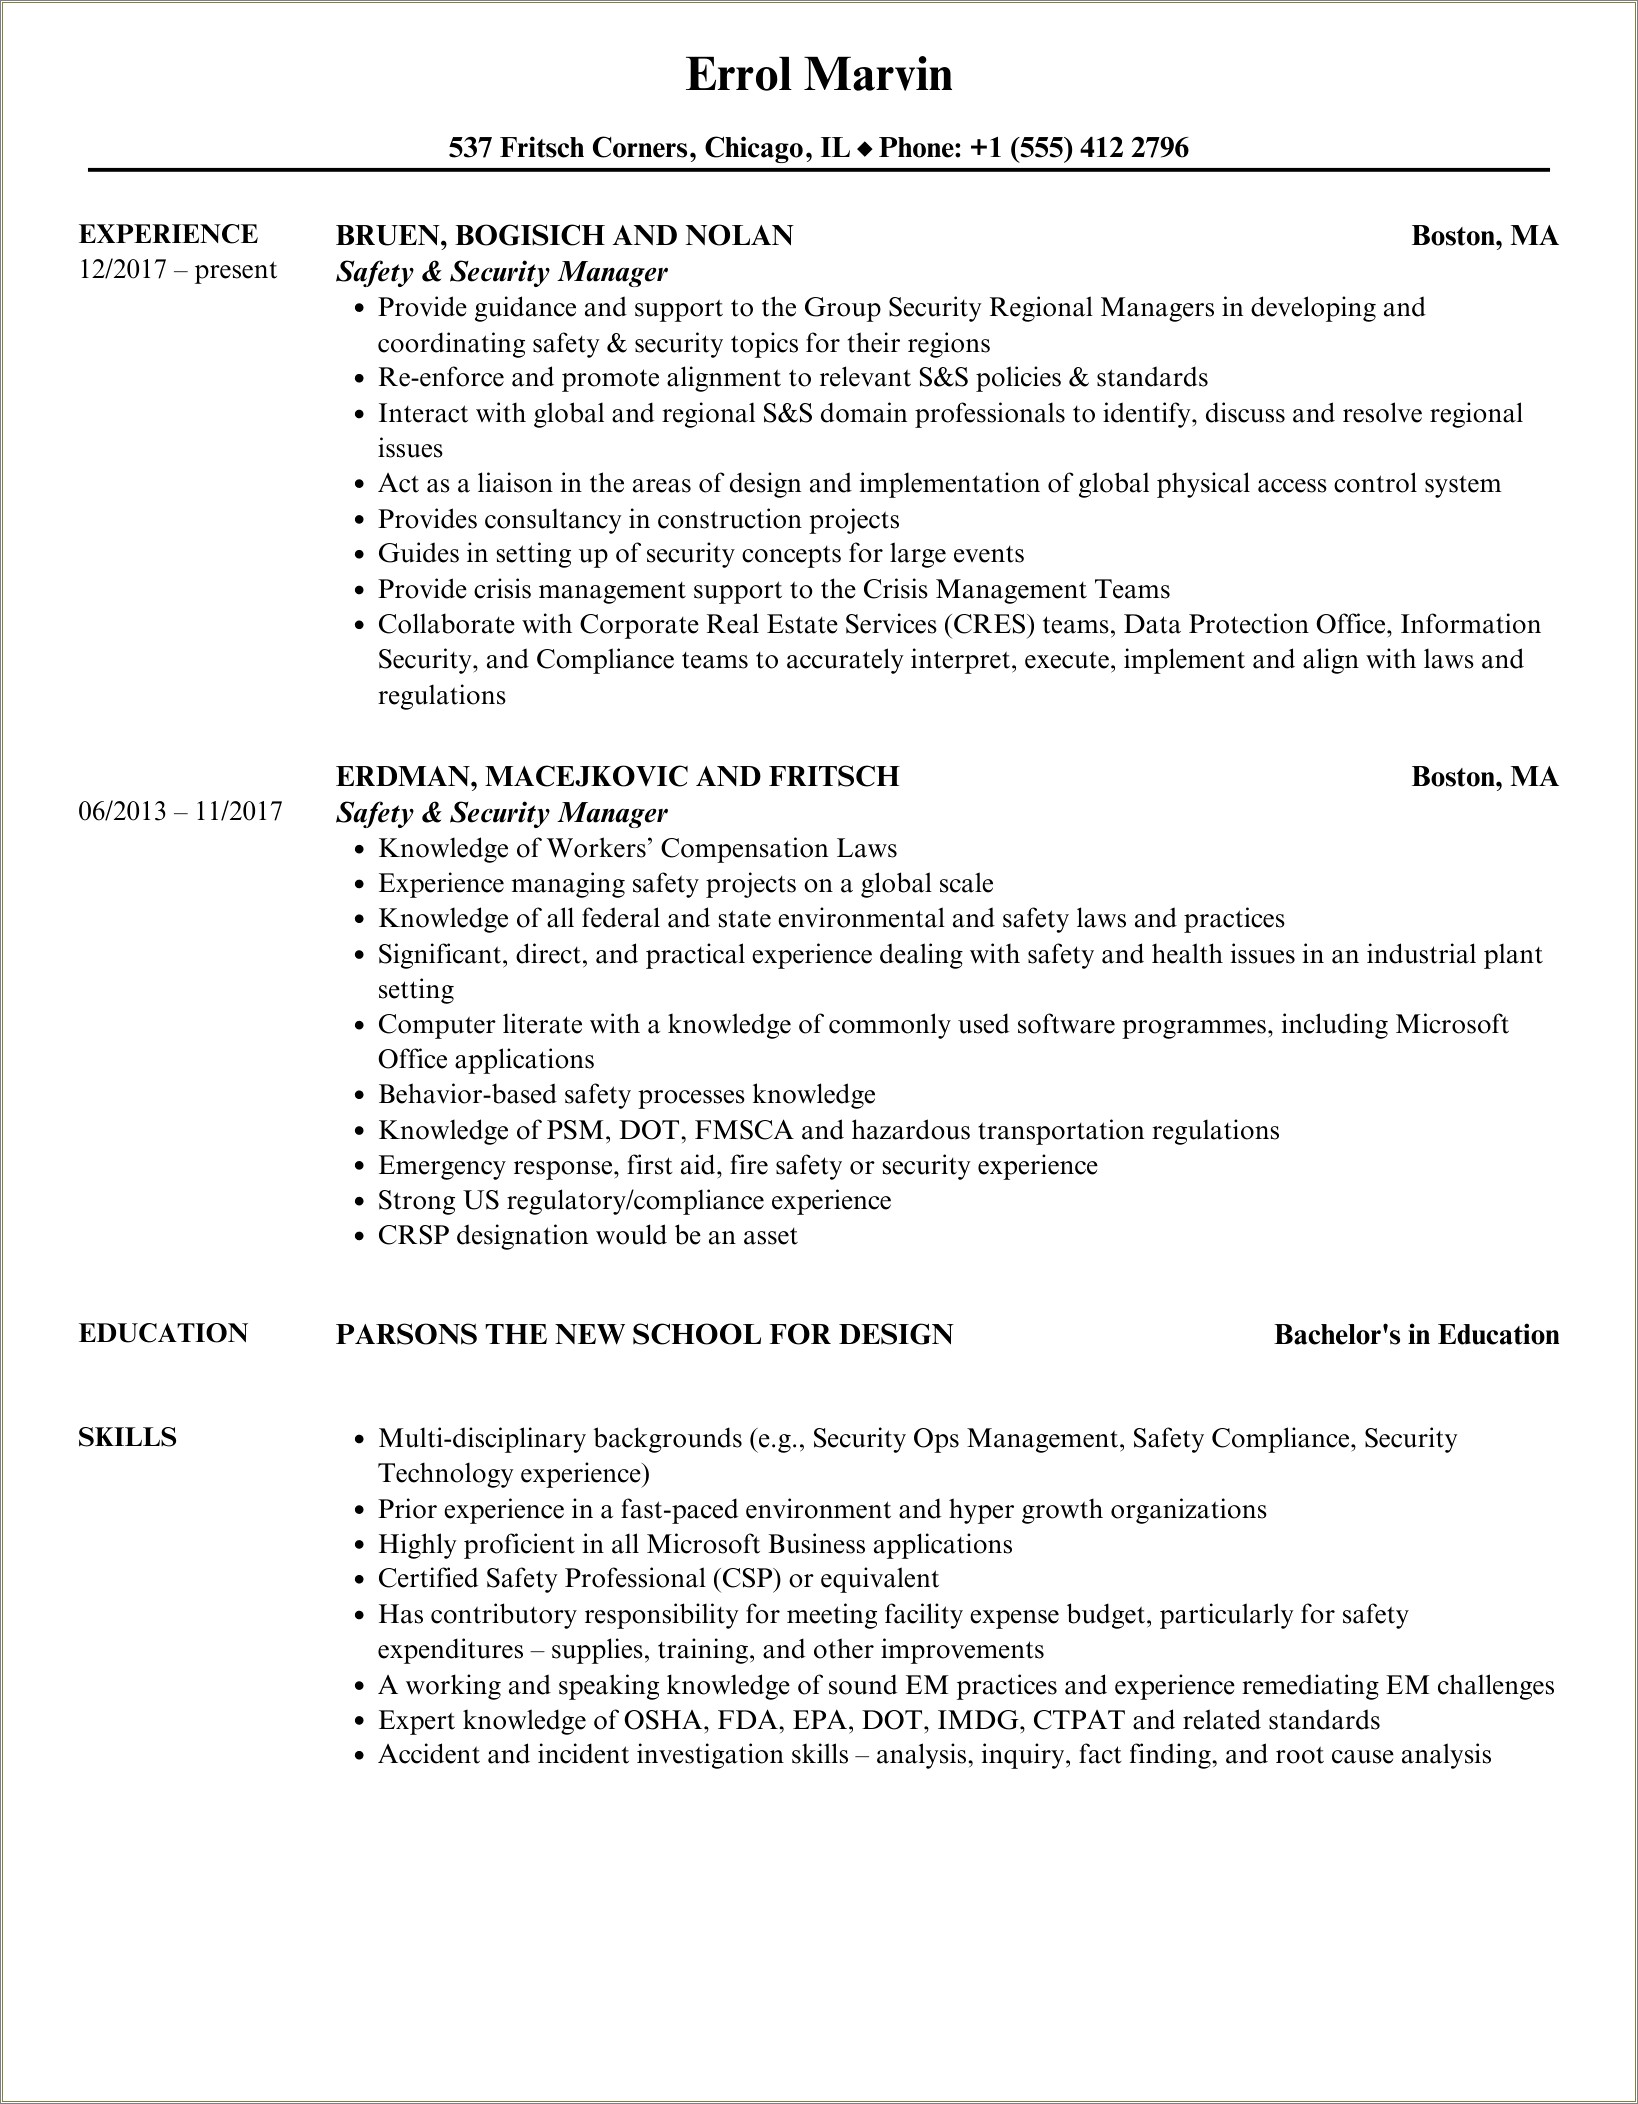 Sample Resume For Hotel Security Manager